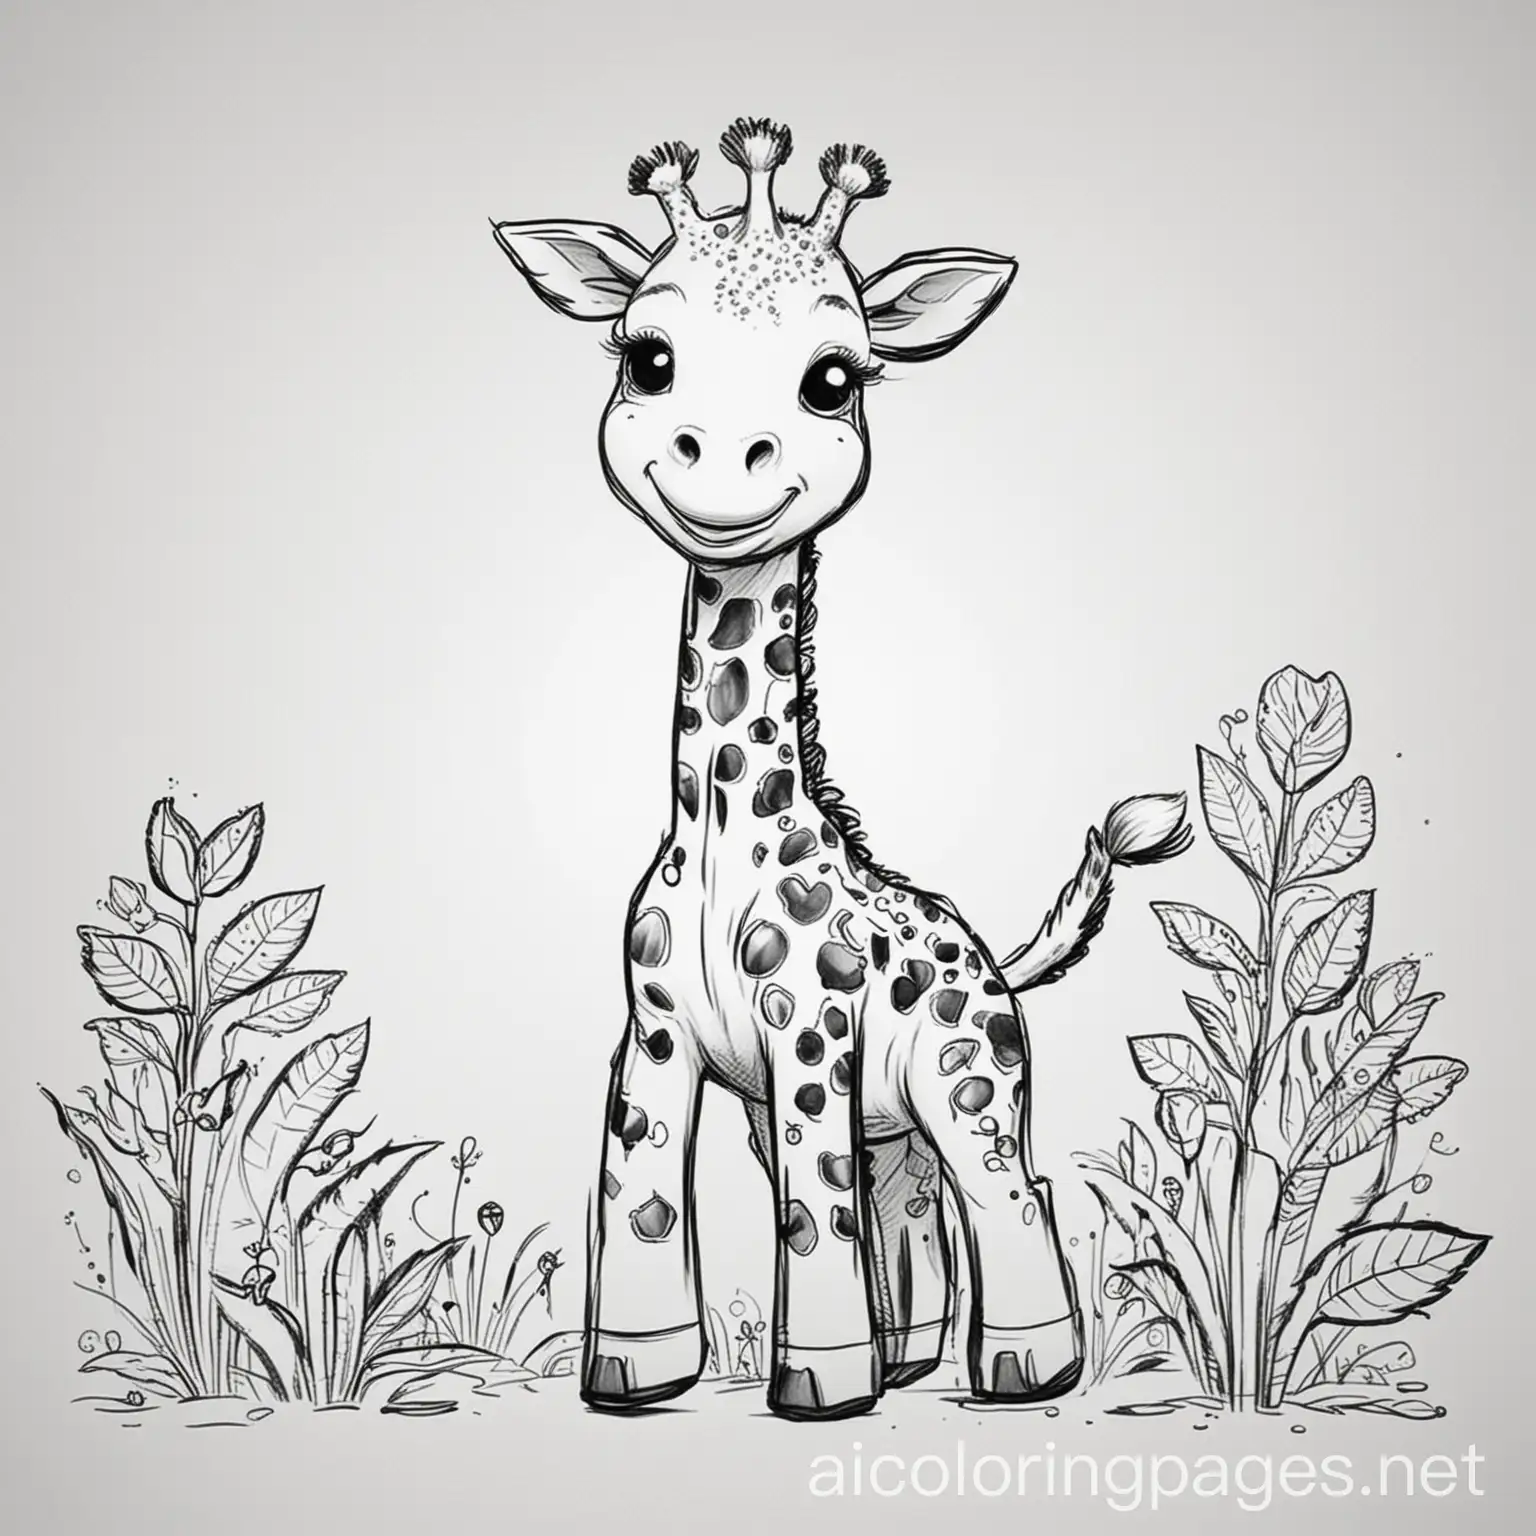 cute happy smiling Giraffe baby black and white for colouring for children, Coloring Page, black and white, line art, white background, Simplicity, Ample White Space. The background of the coloring page is plain white to make it easy for young children to color within the lines. The outlines of all the subjects are easy to distinguish, making it simple for kids to color without too much difficulty, Coloring Page, black and white, line art, white background, Simplicity, Ample White Space. The background of the coloring page is plain white to make it easy for young children to color within the lines. The outlines of all the subjects are easy to distinguish, making it simple for kids to color without too much difficulty, Coloring Page, black and white, line art, white background, Simplicity, Ample White Space. The background of the coloring page is plain white to make it easy for young children to color within the lines. The outlines of all the subjects are easy to distinguish, making it simple for kids to color without too much difficulty